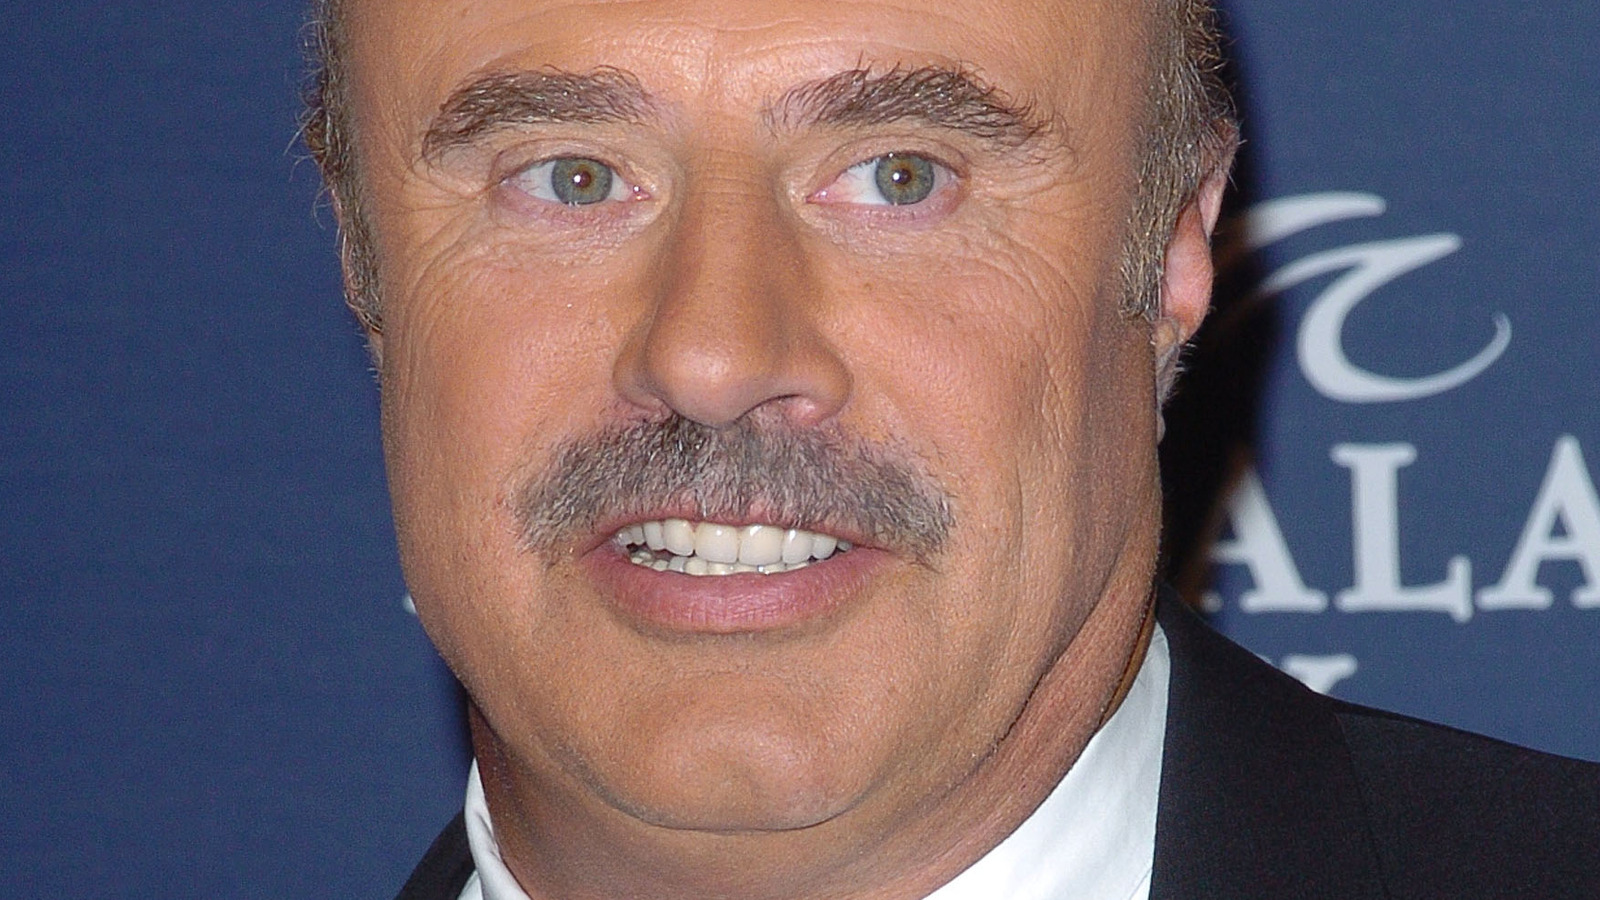 Is Dr. Phil a Doctor?